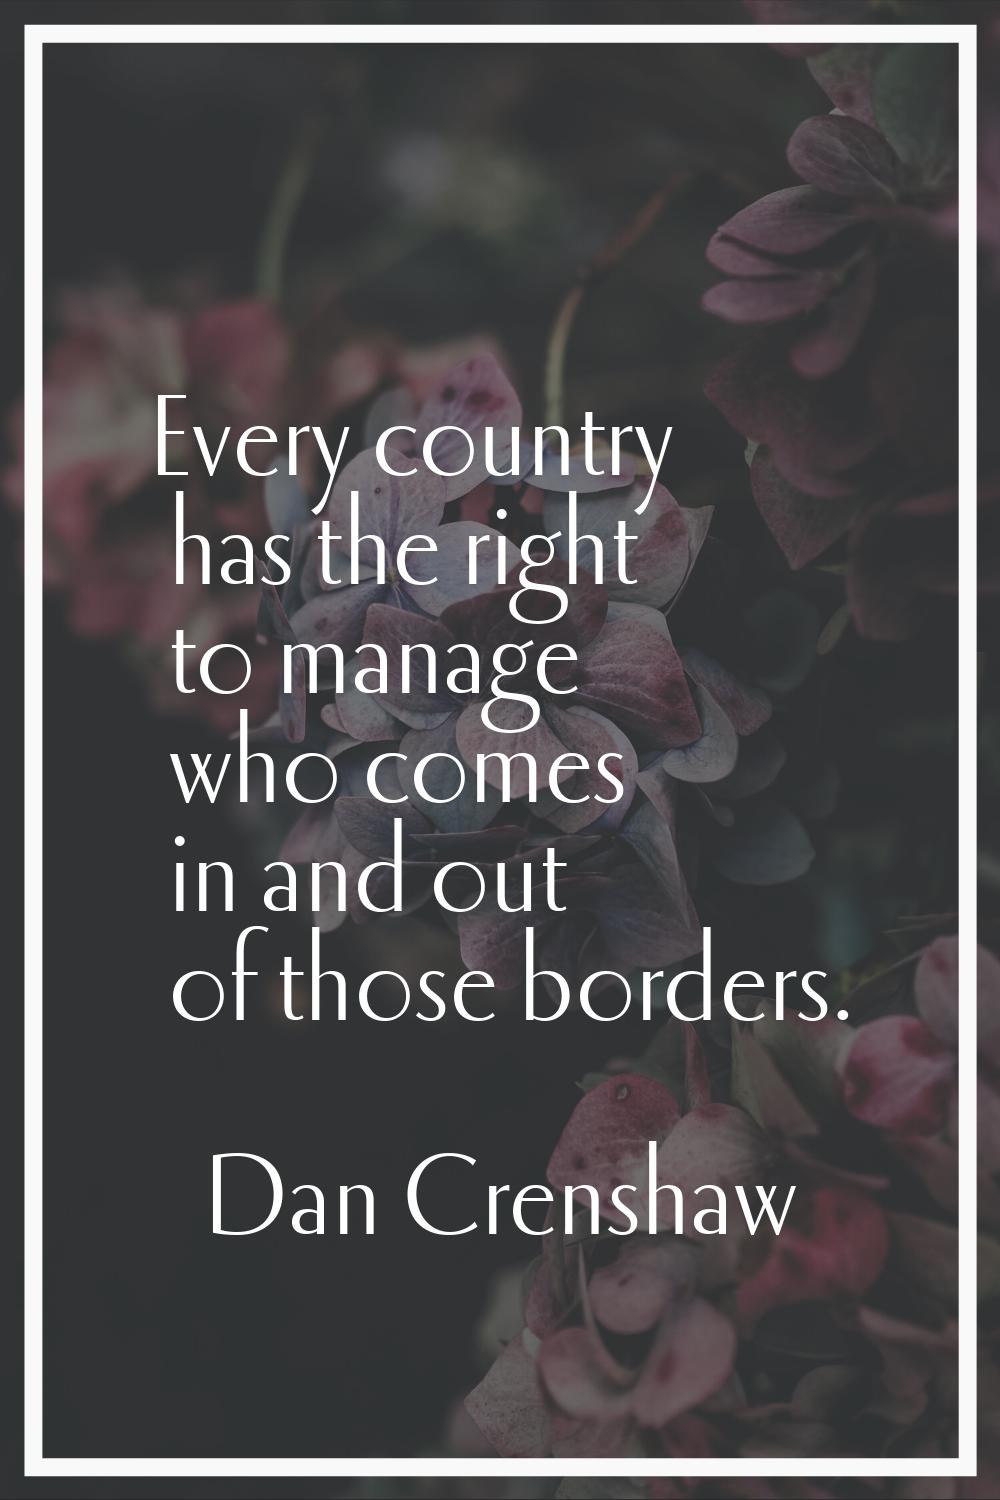 Every country has the right to manage who comes in and out of those borders.